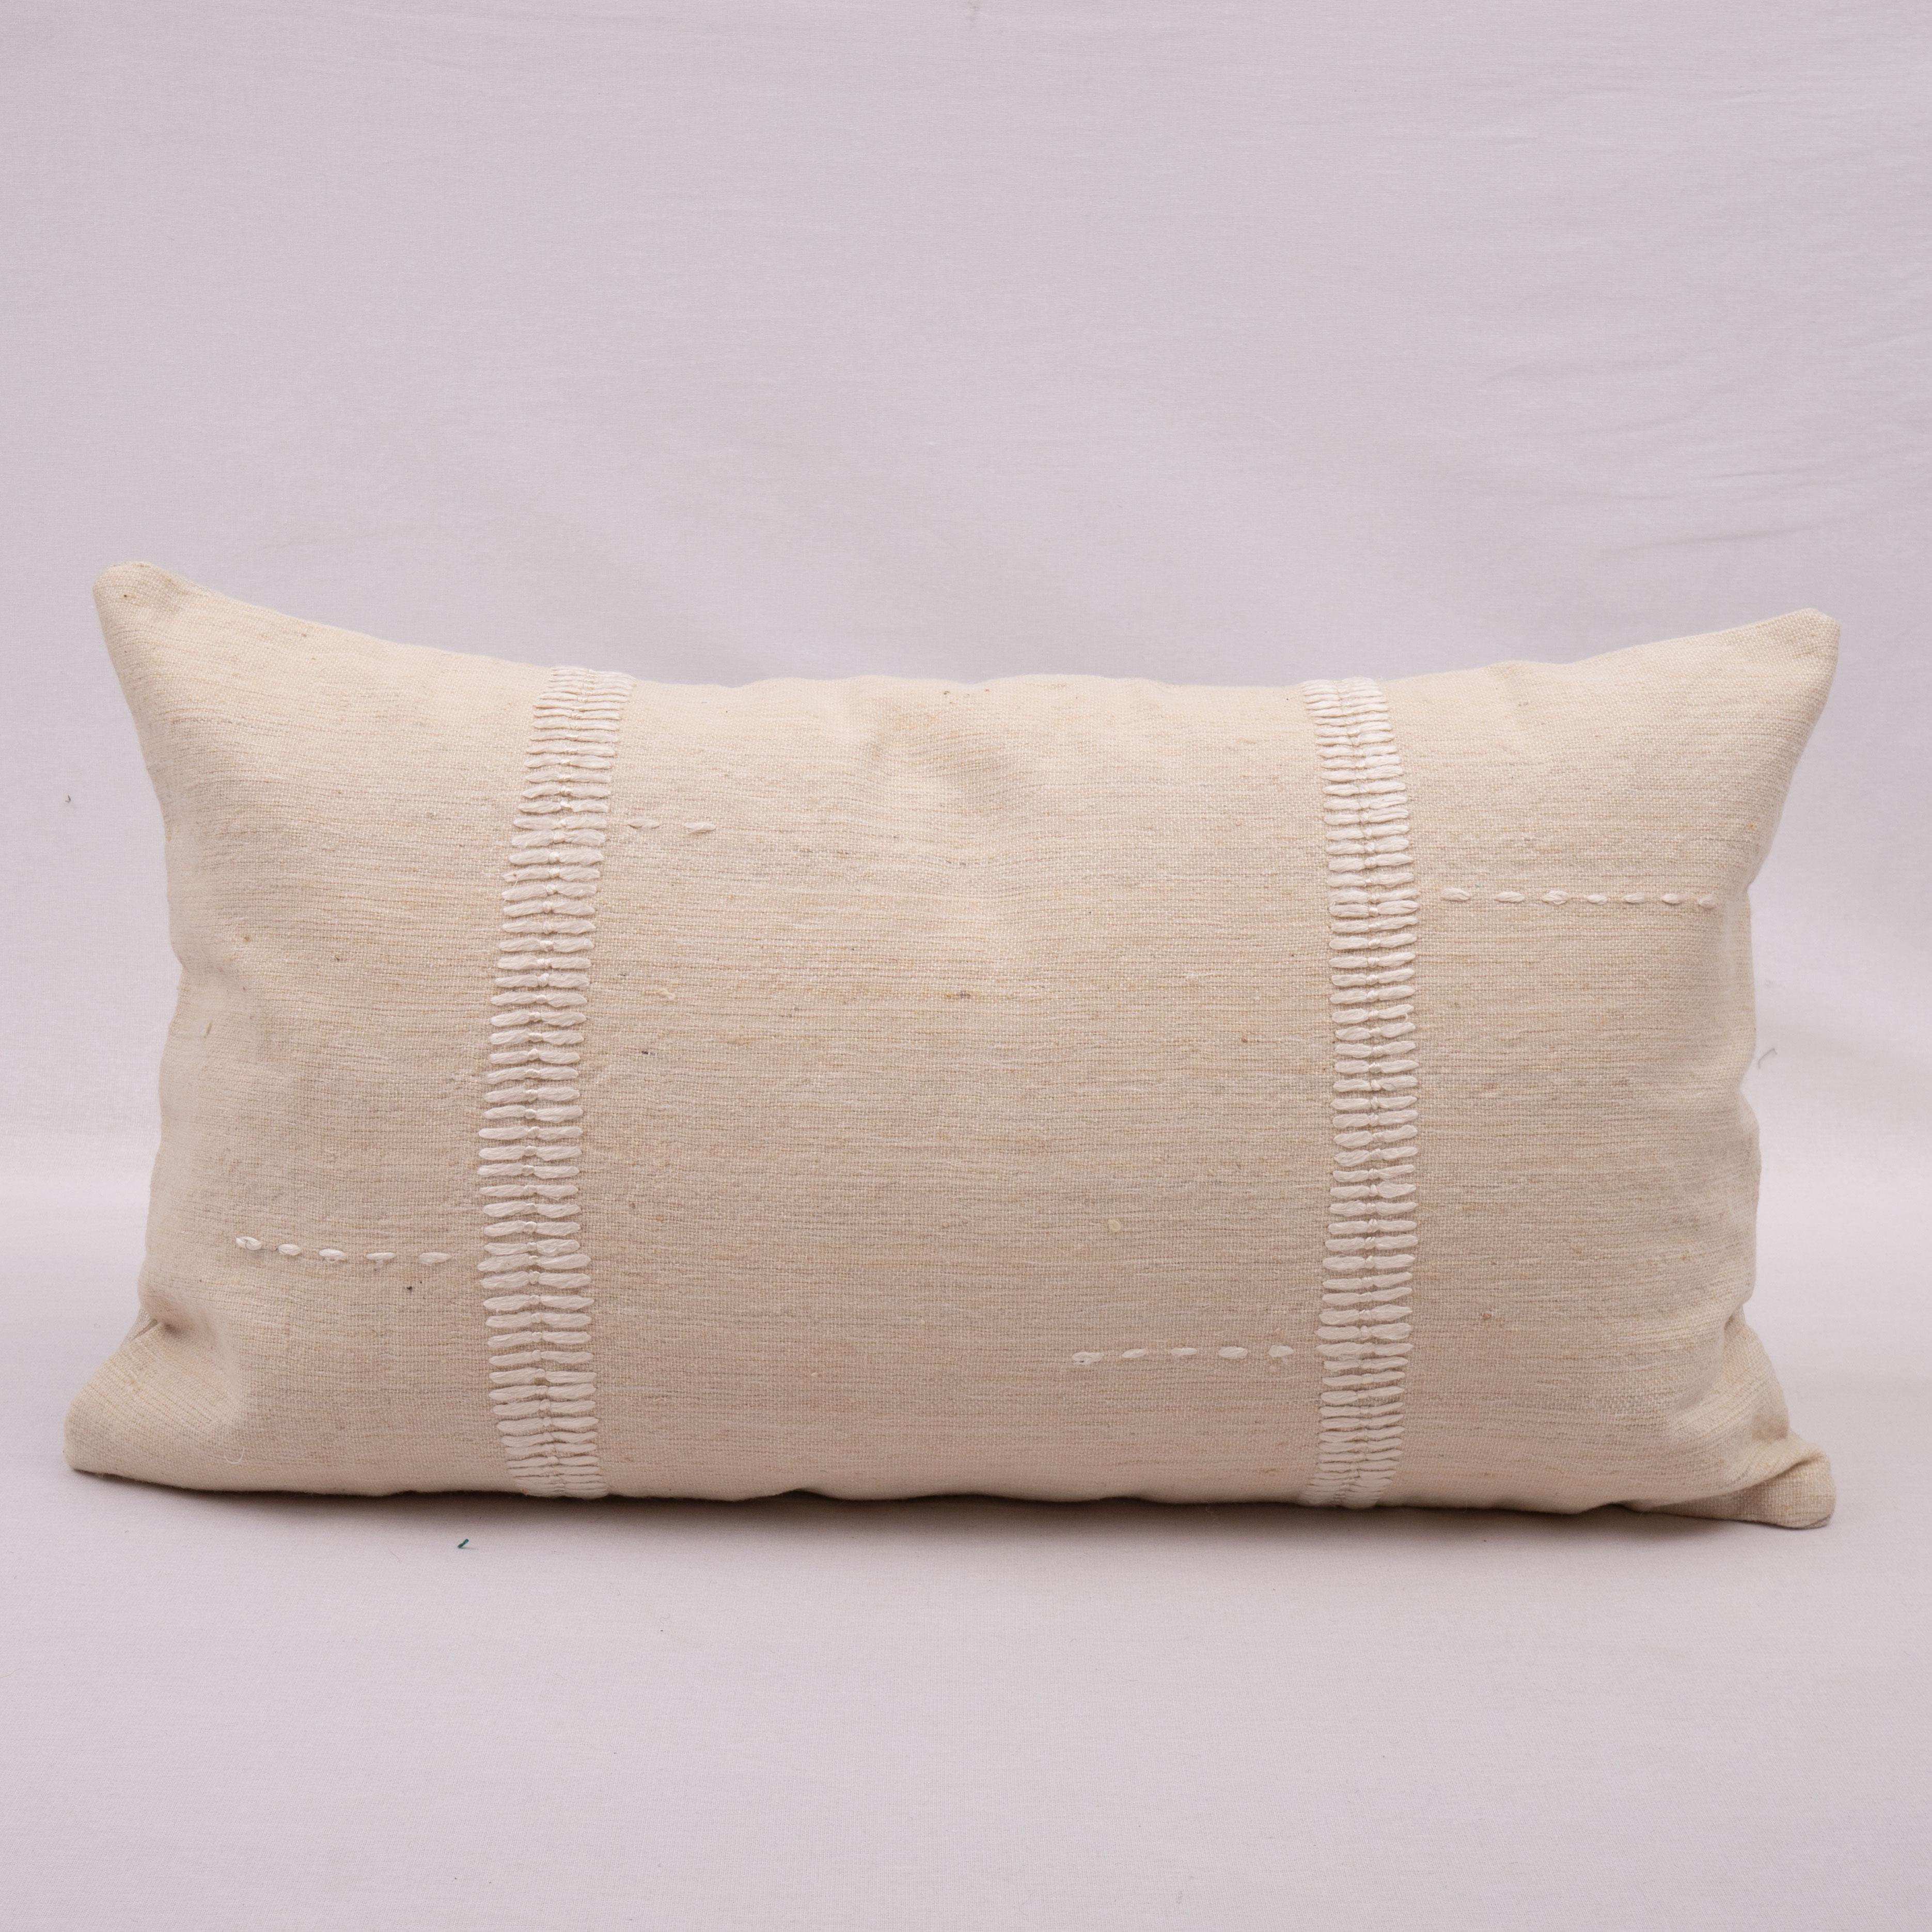 This pillow case is made from a vintage Anatolian Cotton Cover. Hand done silk stitching on it is our addition to the piece to give it a fine detail.

It does not come with inserts.
linen in the back.
Zipper closure.
Dry Cleaning is